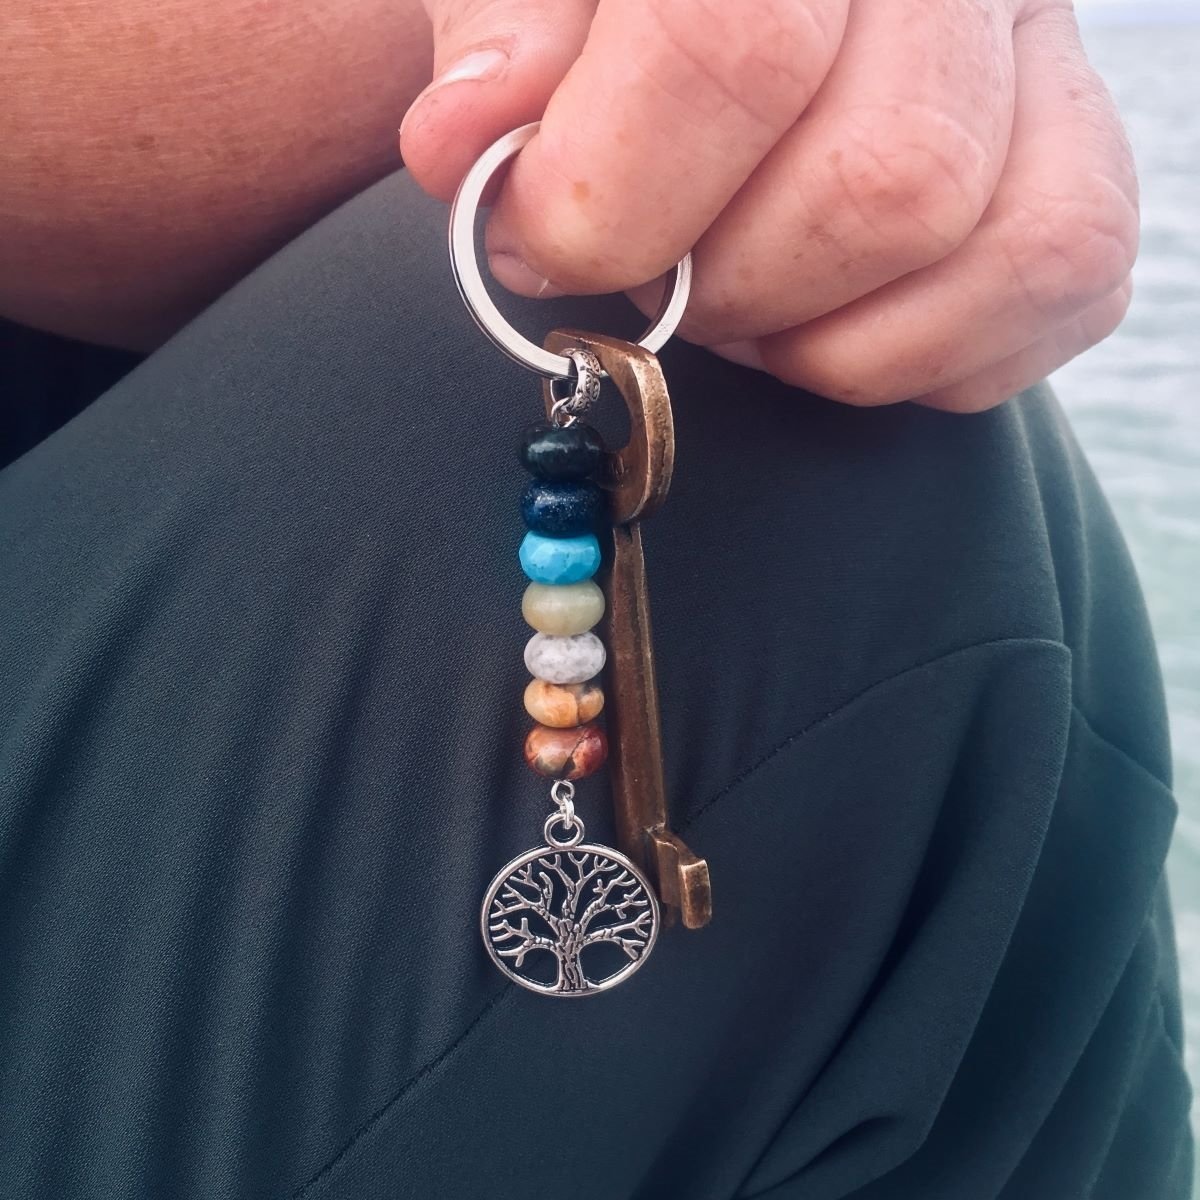 Top Plaza 7 Chakra Healing Crystals Stone Keychain Tree of Life Keychains  Keyrings Lucky Car Keychain Bag Charm Pendant Accessories Bronze Vintage  Keychains Christmas Gifts - Heart at  Women's Clothing store